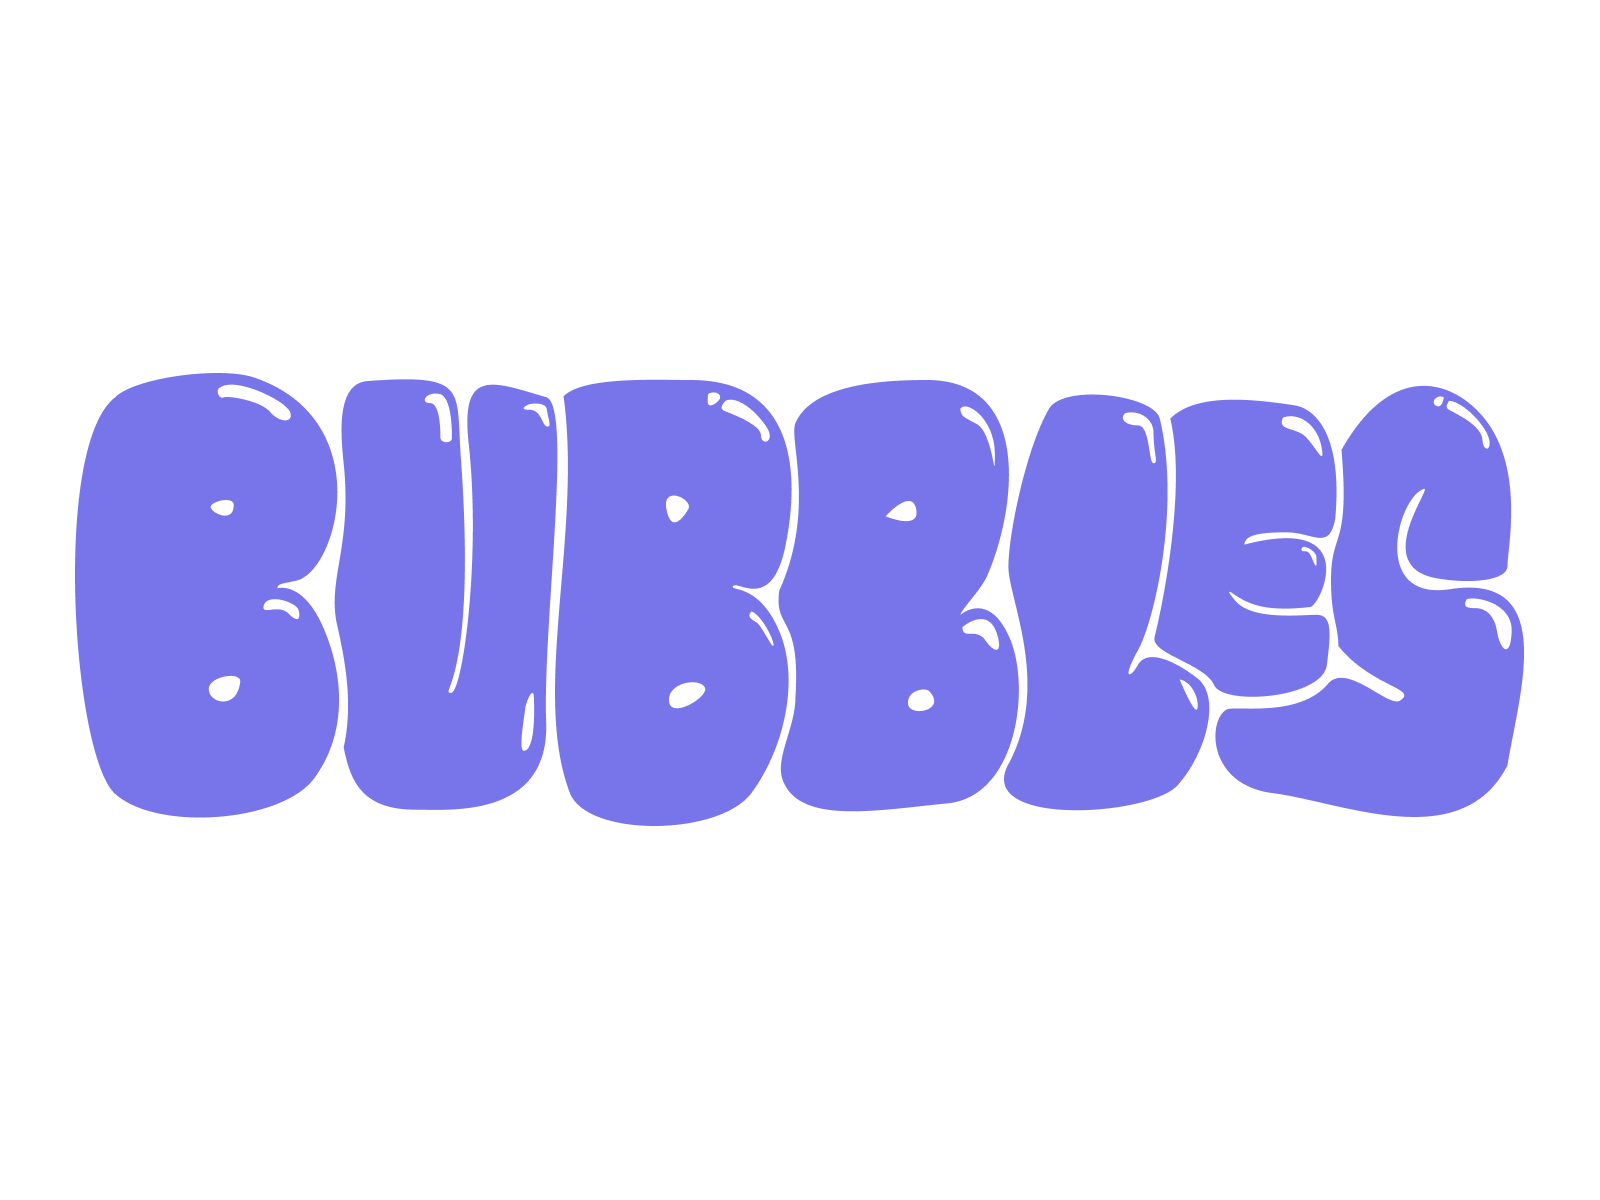 Bubbles word mark by Jon Troutman for Life360 on Dribbble